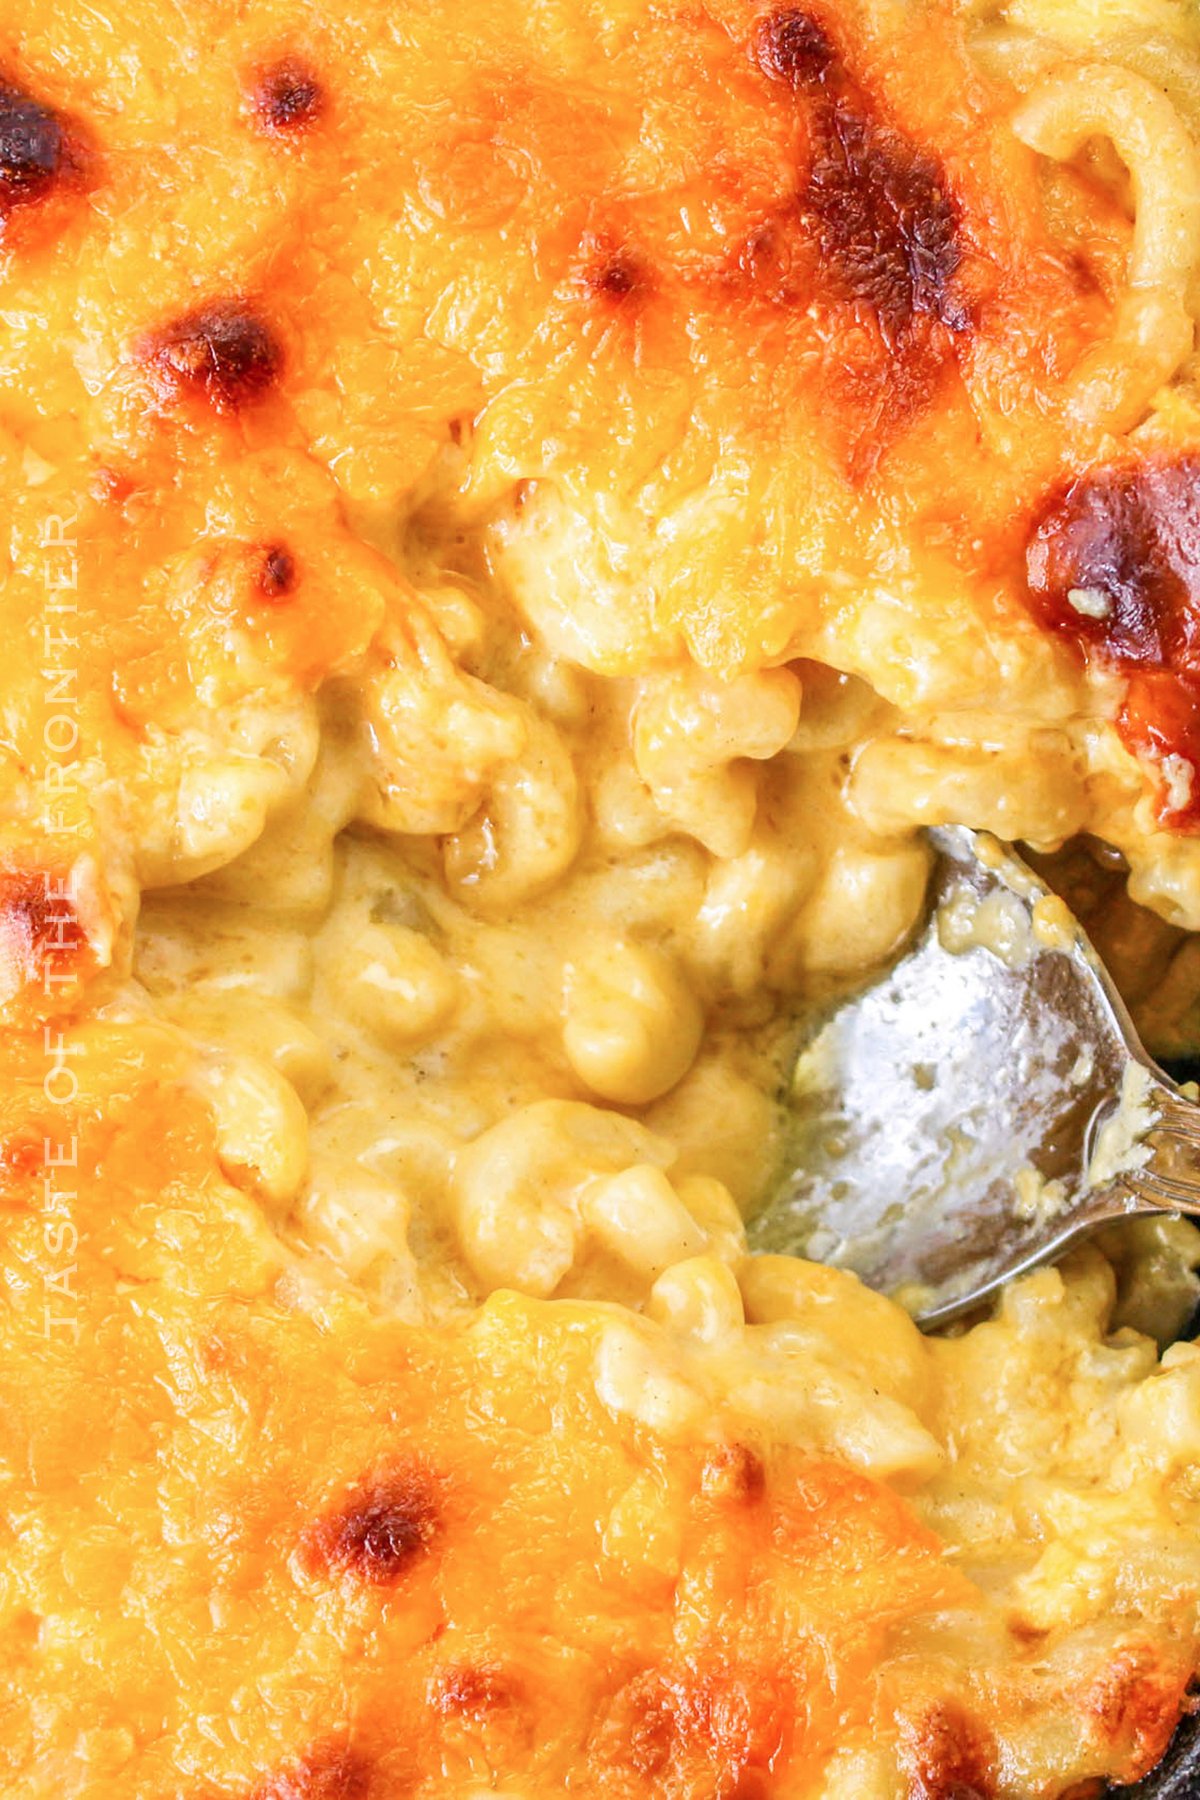 Recipe for Baked Mac and Cheese